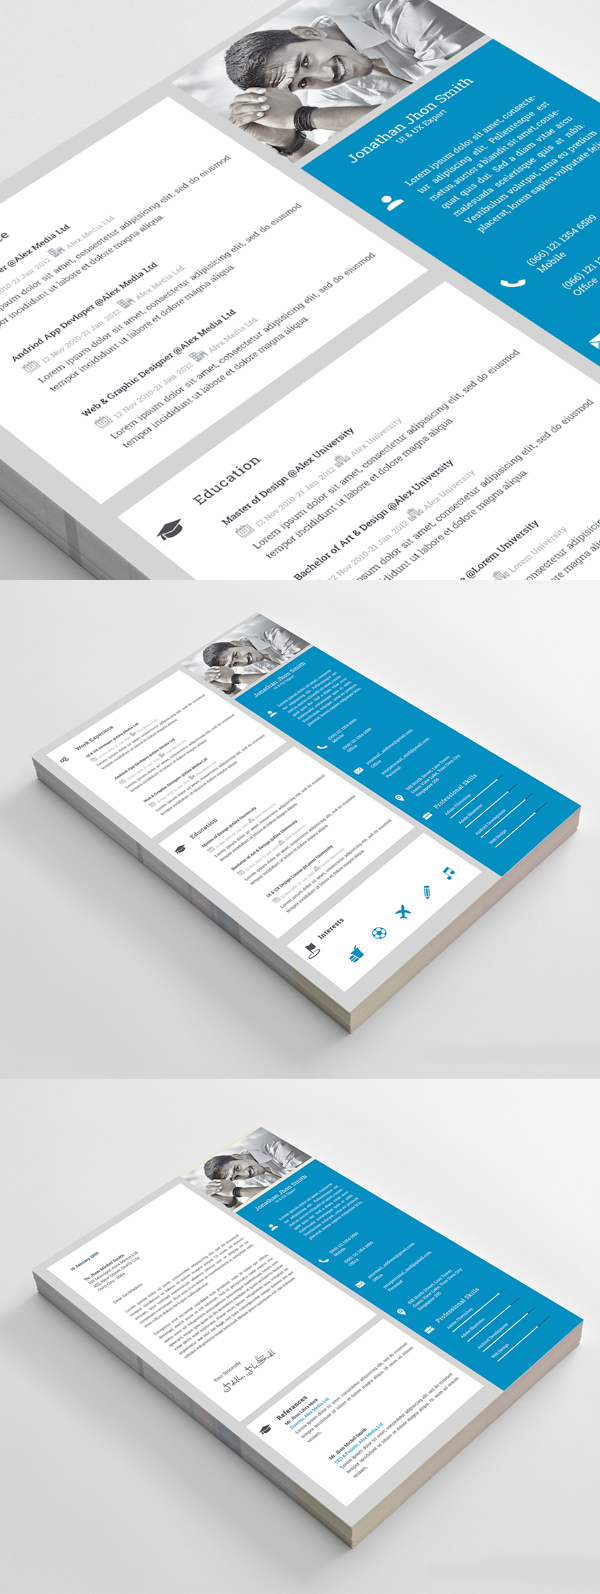 Free Resume Template and Resume Mockup PSD